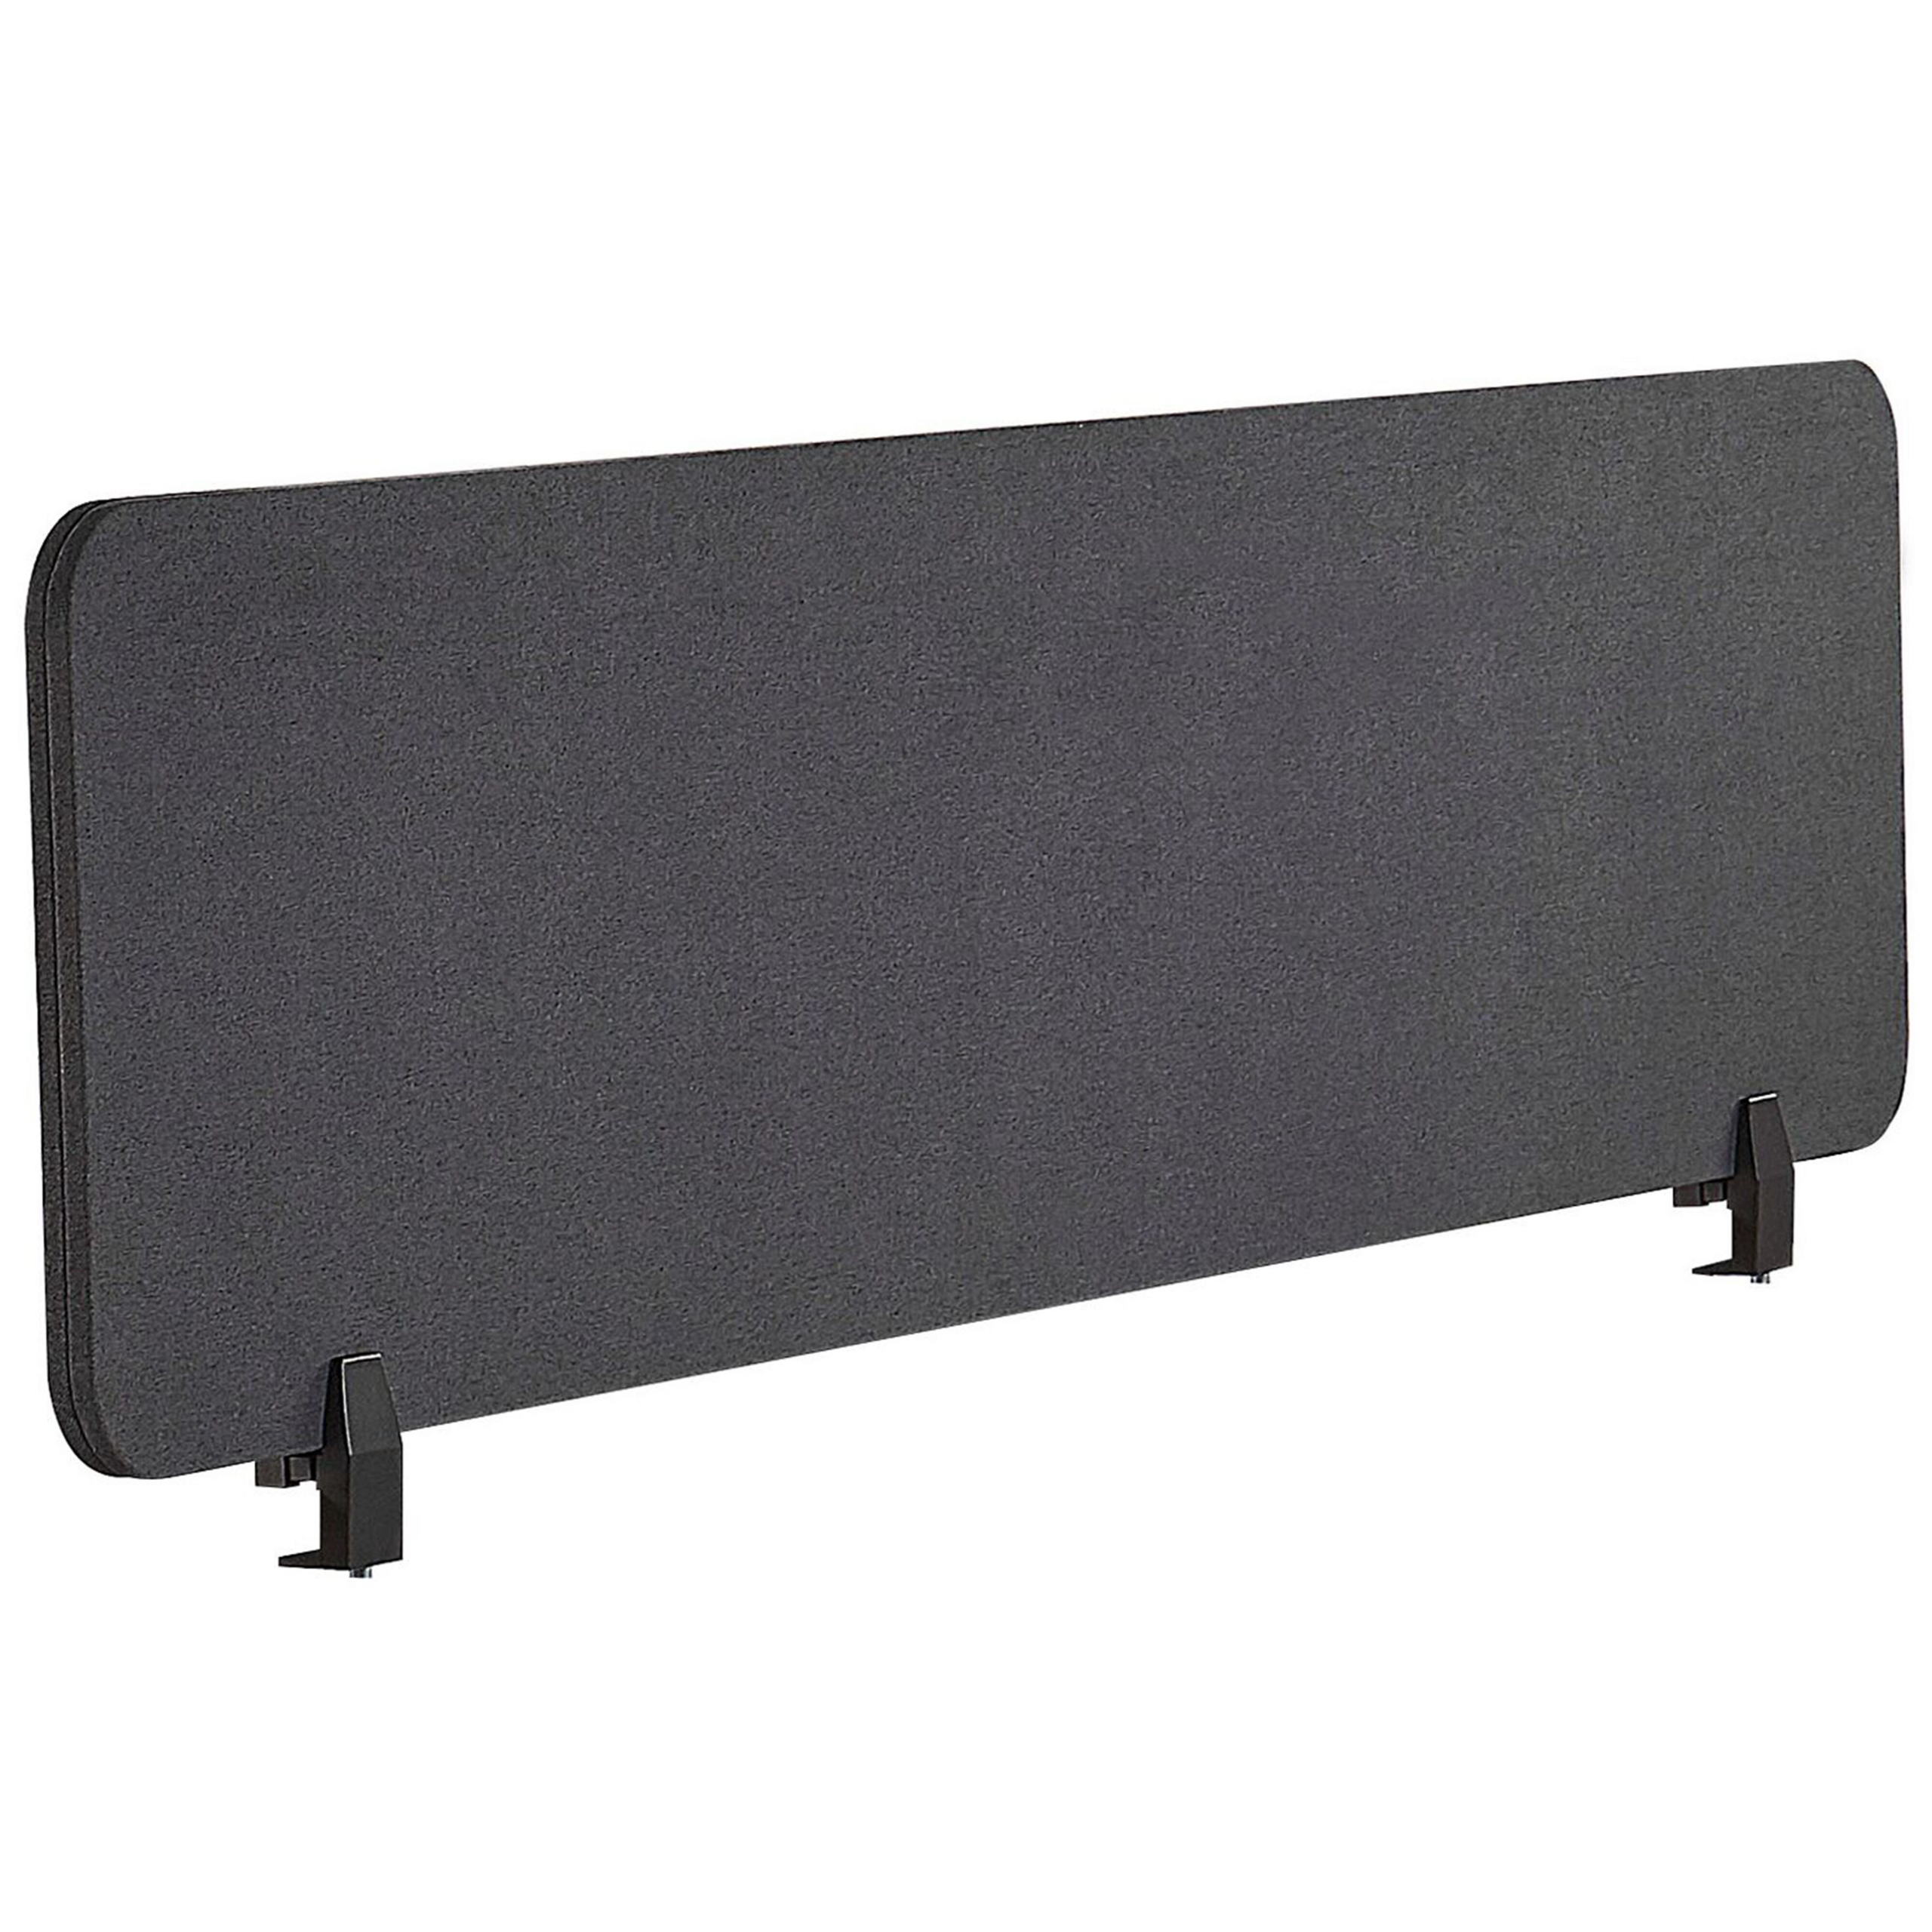 Beliani Desk Screen Dark Grey PET Board Fabric Cover 160 x 40 cm Acoustic Screen Modular Mounting Clamps Home Office Material:Polyester Size:2x40x160